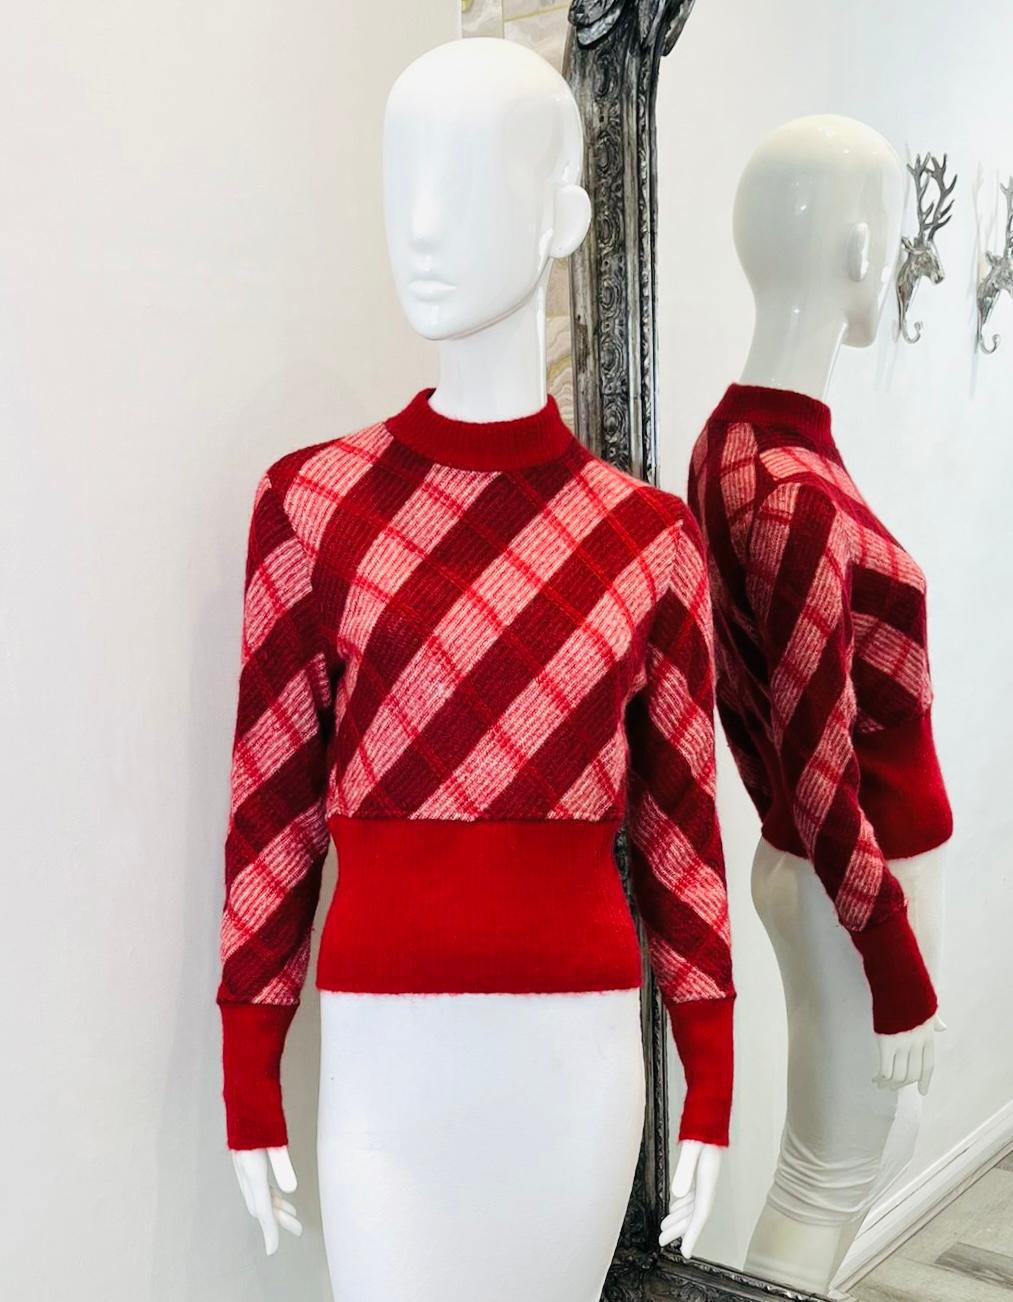 Miu Miu Cropped Mohair Jumper

Red knitwear designed with diamond check pattern.

Featuring plain mock neckline and red ribbed sleeves and hem.

Size – 42IT

Condition – Good (Minor hole to the fabric)

Composition – 67% Mohair, 30% Polyamide, 3%